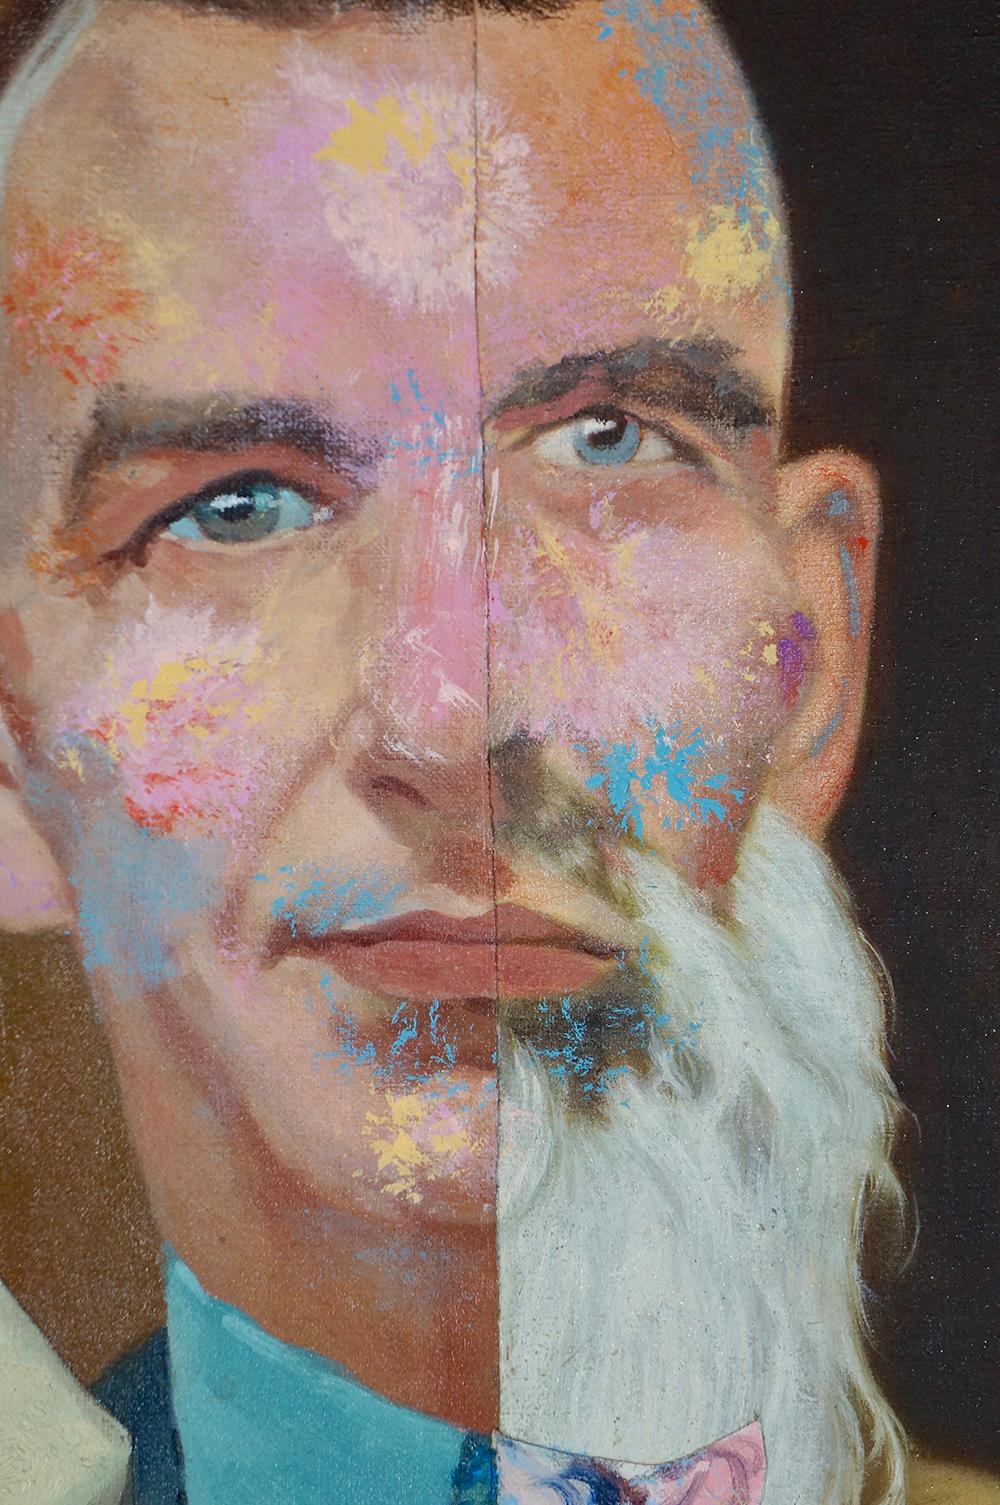 John Baker’s “He Stayed Behind in Katmandu II” is an acrylic portrait painting on canvas with collage 20.25 x 17.75 x 1.5 inches in blues, tans, pinks and flesh tones. The western “suit” is being transformed by the eastern wisdom tradition. The